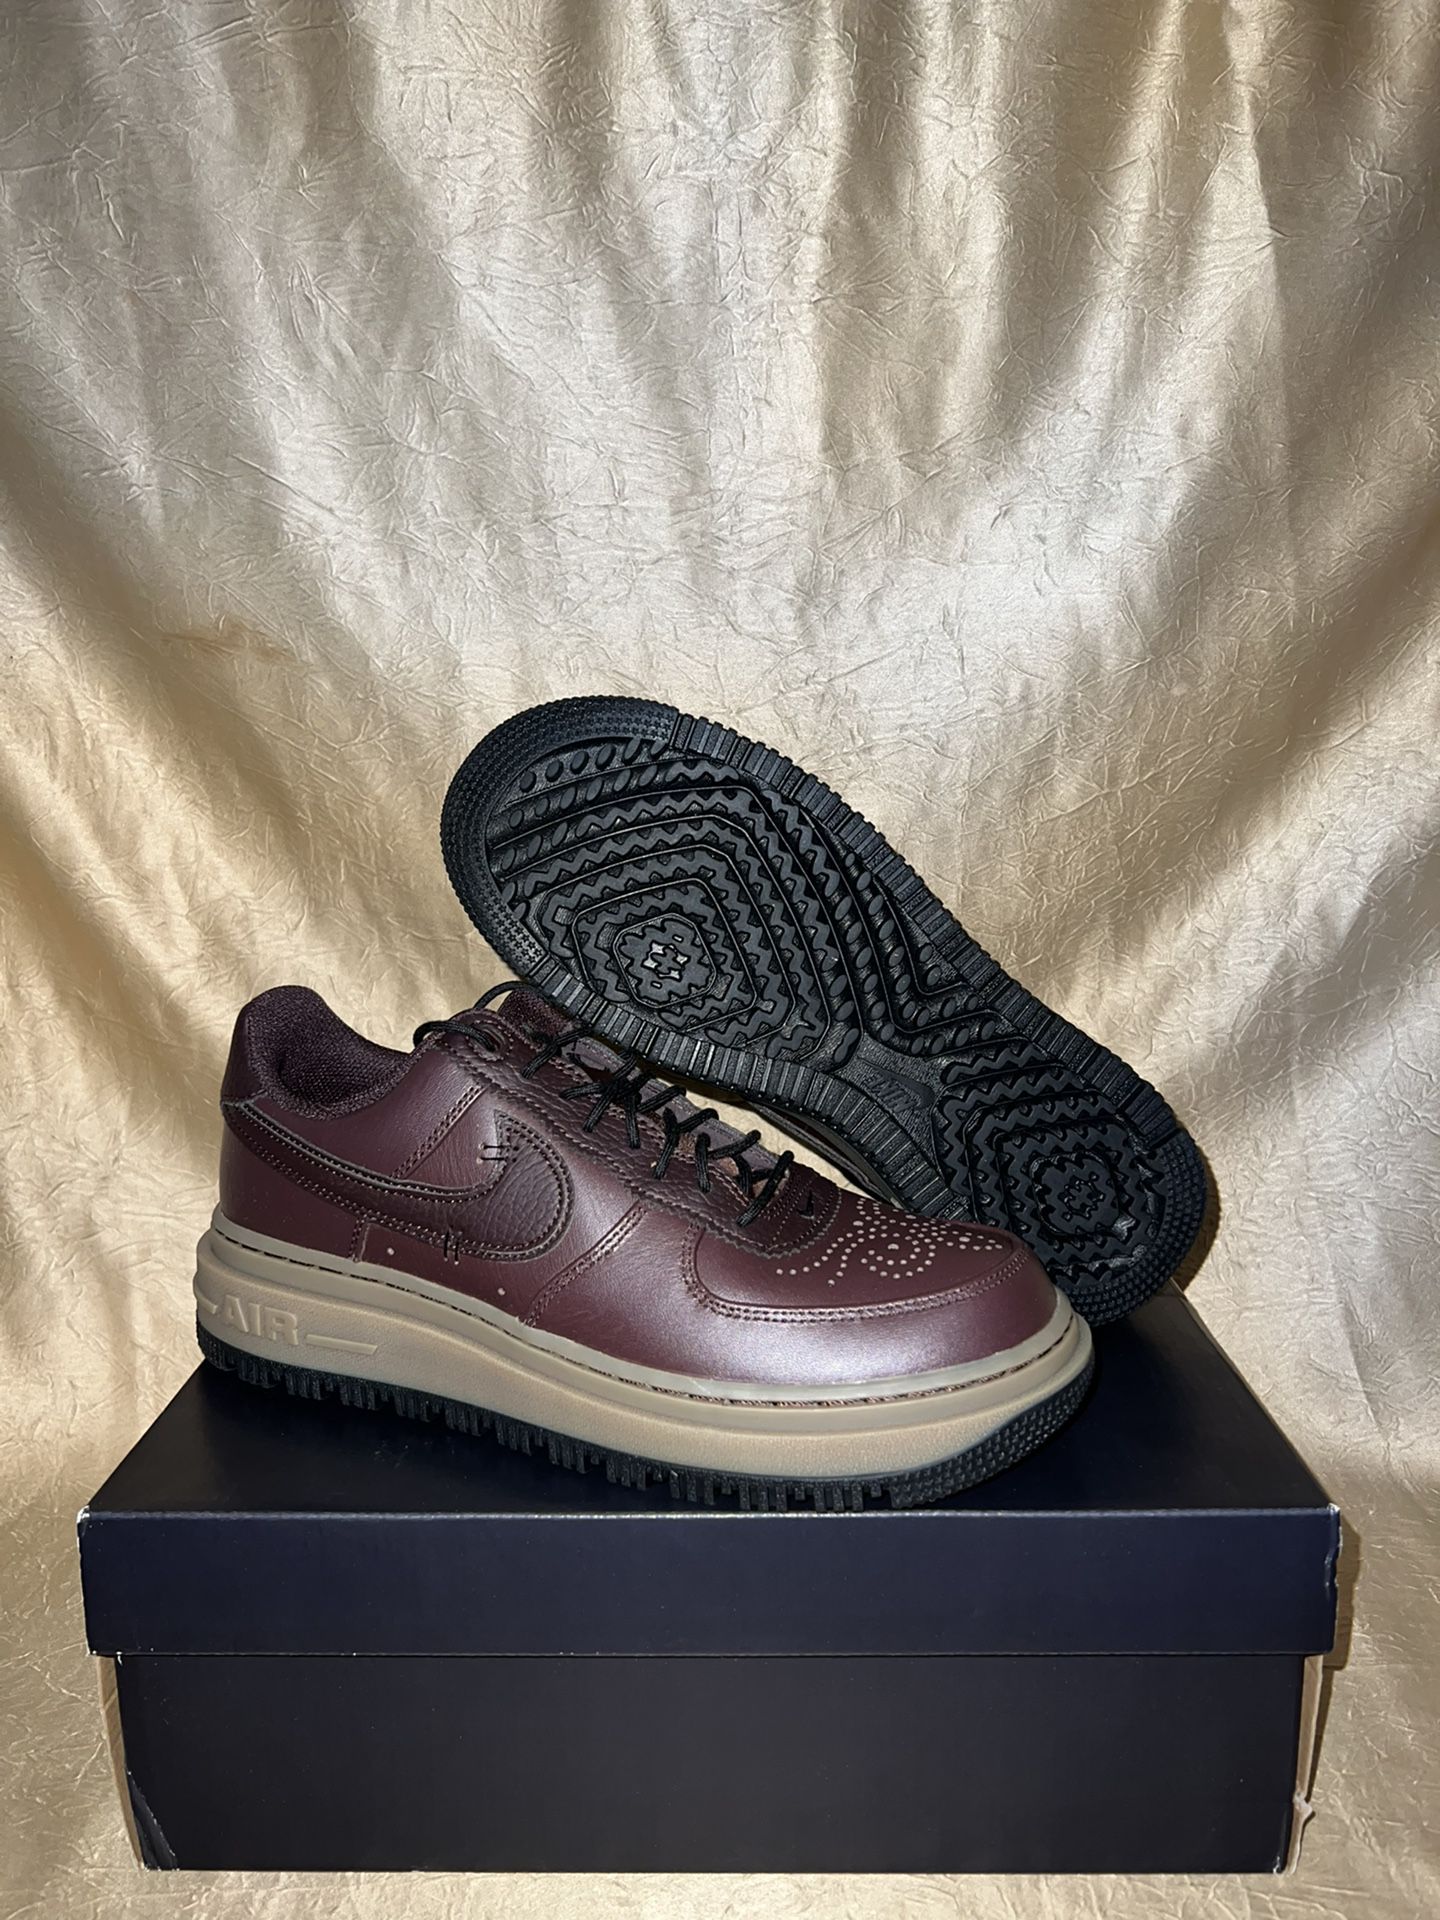 Nike Air Force 1 Low Luxe Brown Basalt DN2451-200 Men's Sz 8.5 Shoes FAST  SHIP! for Sale in New Braunfels, TX - OfferUp